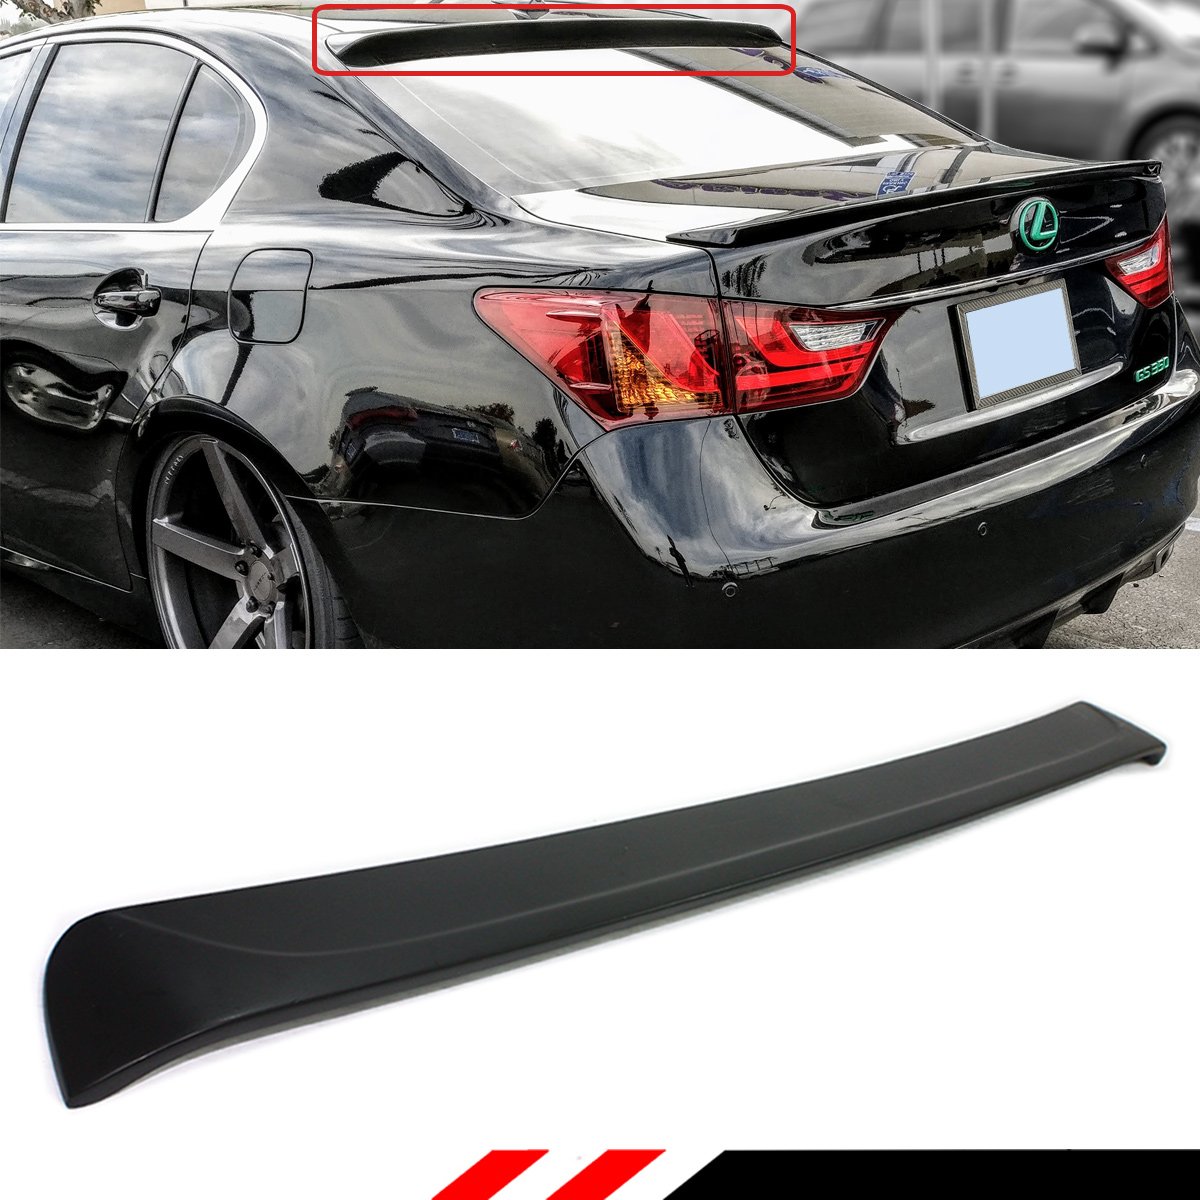 Amazon.com: Cuztom Tuning Fits for 2013-2016 Lexus GS350 GS450H GS200T GSF  F Sport Style Rear Roof Window Spoiler Wing : Automotive